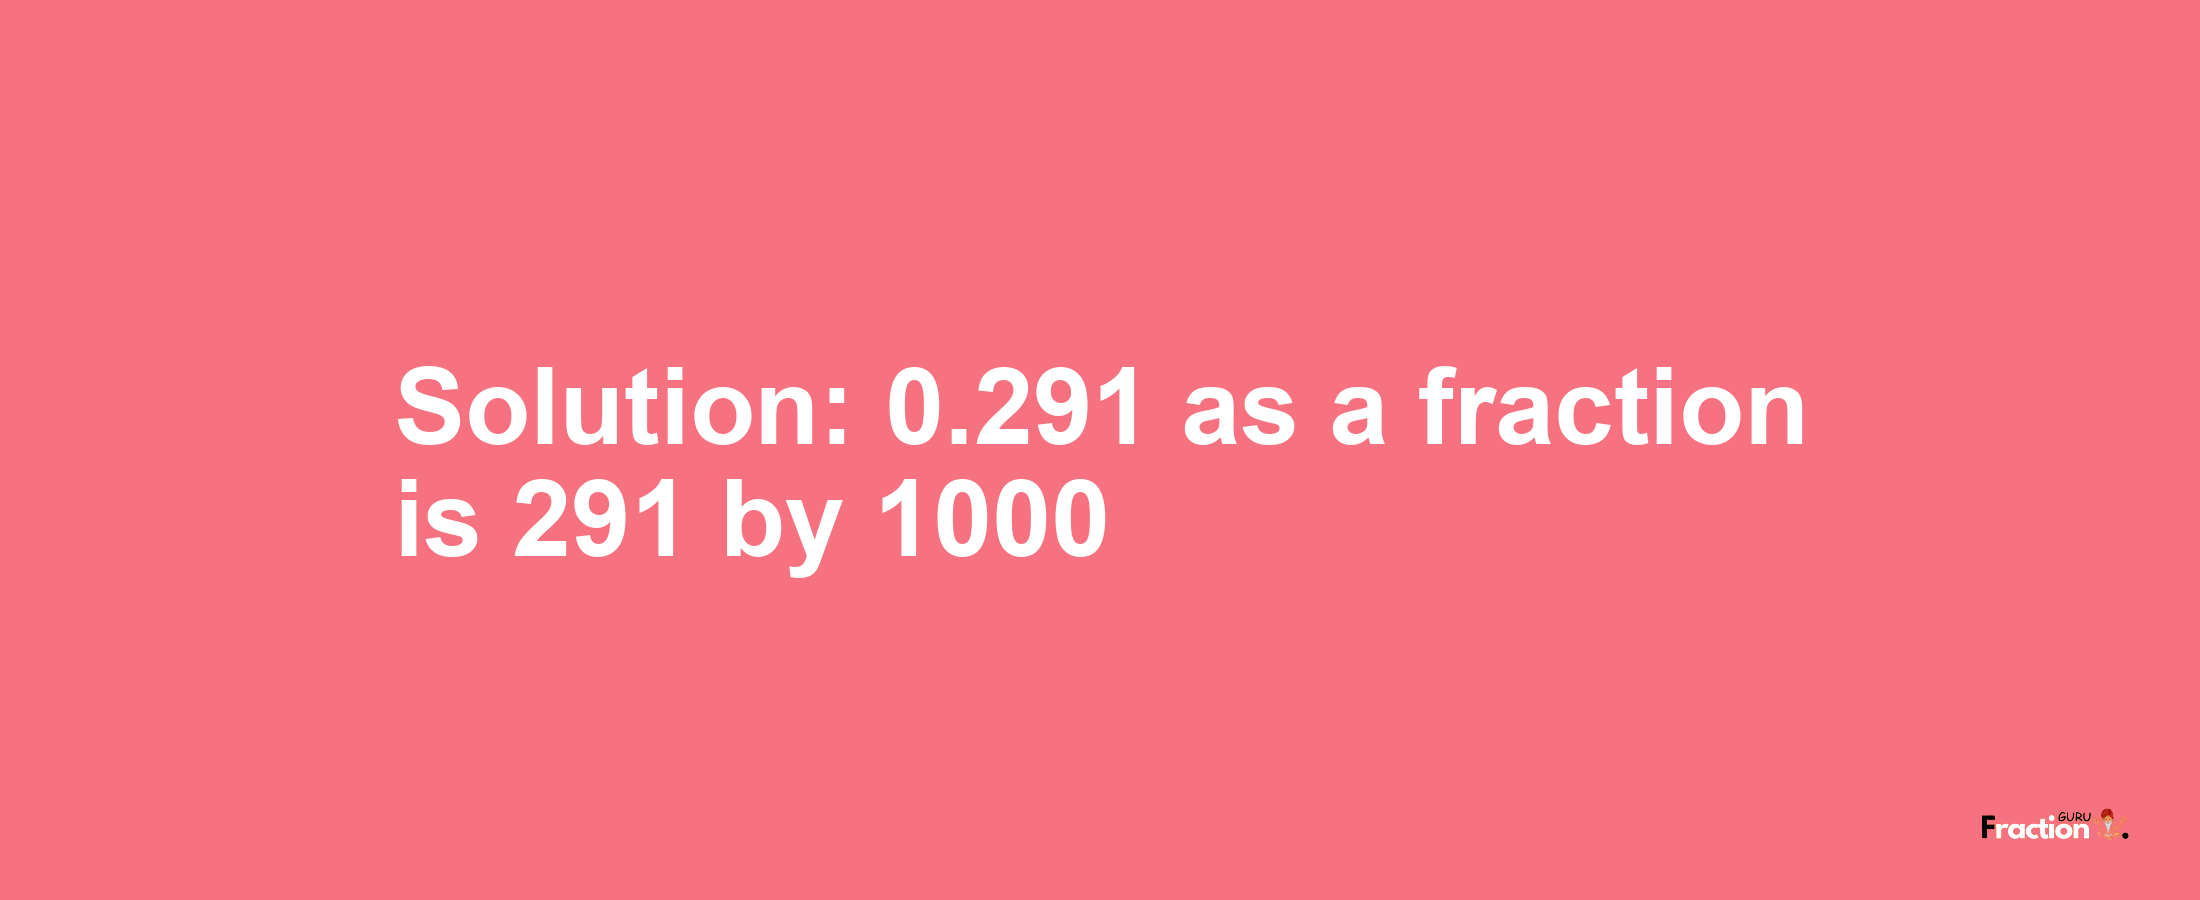 Solution:0.291 as a fraction is 291/1000